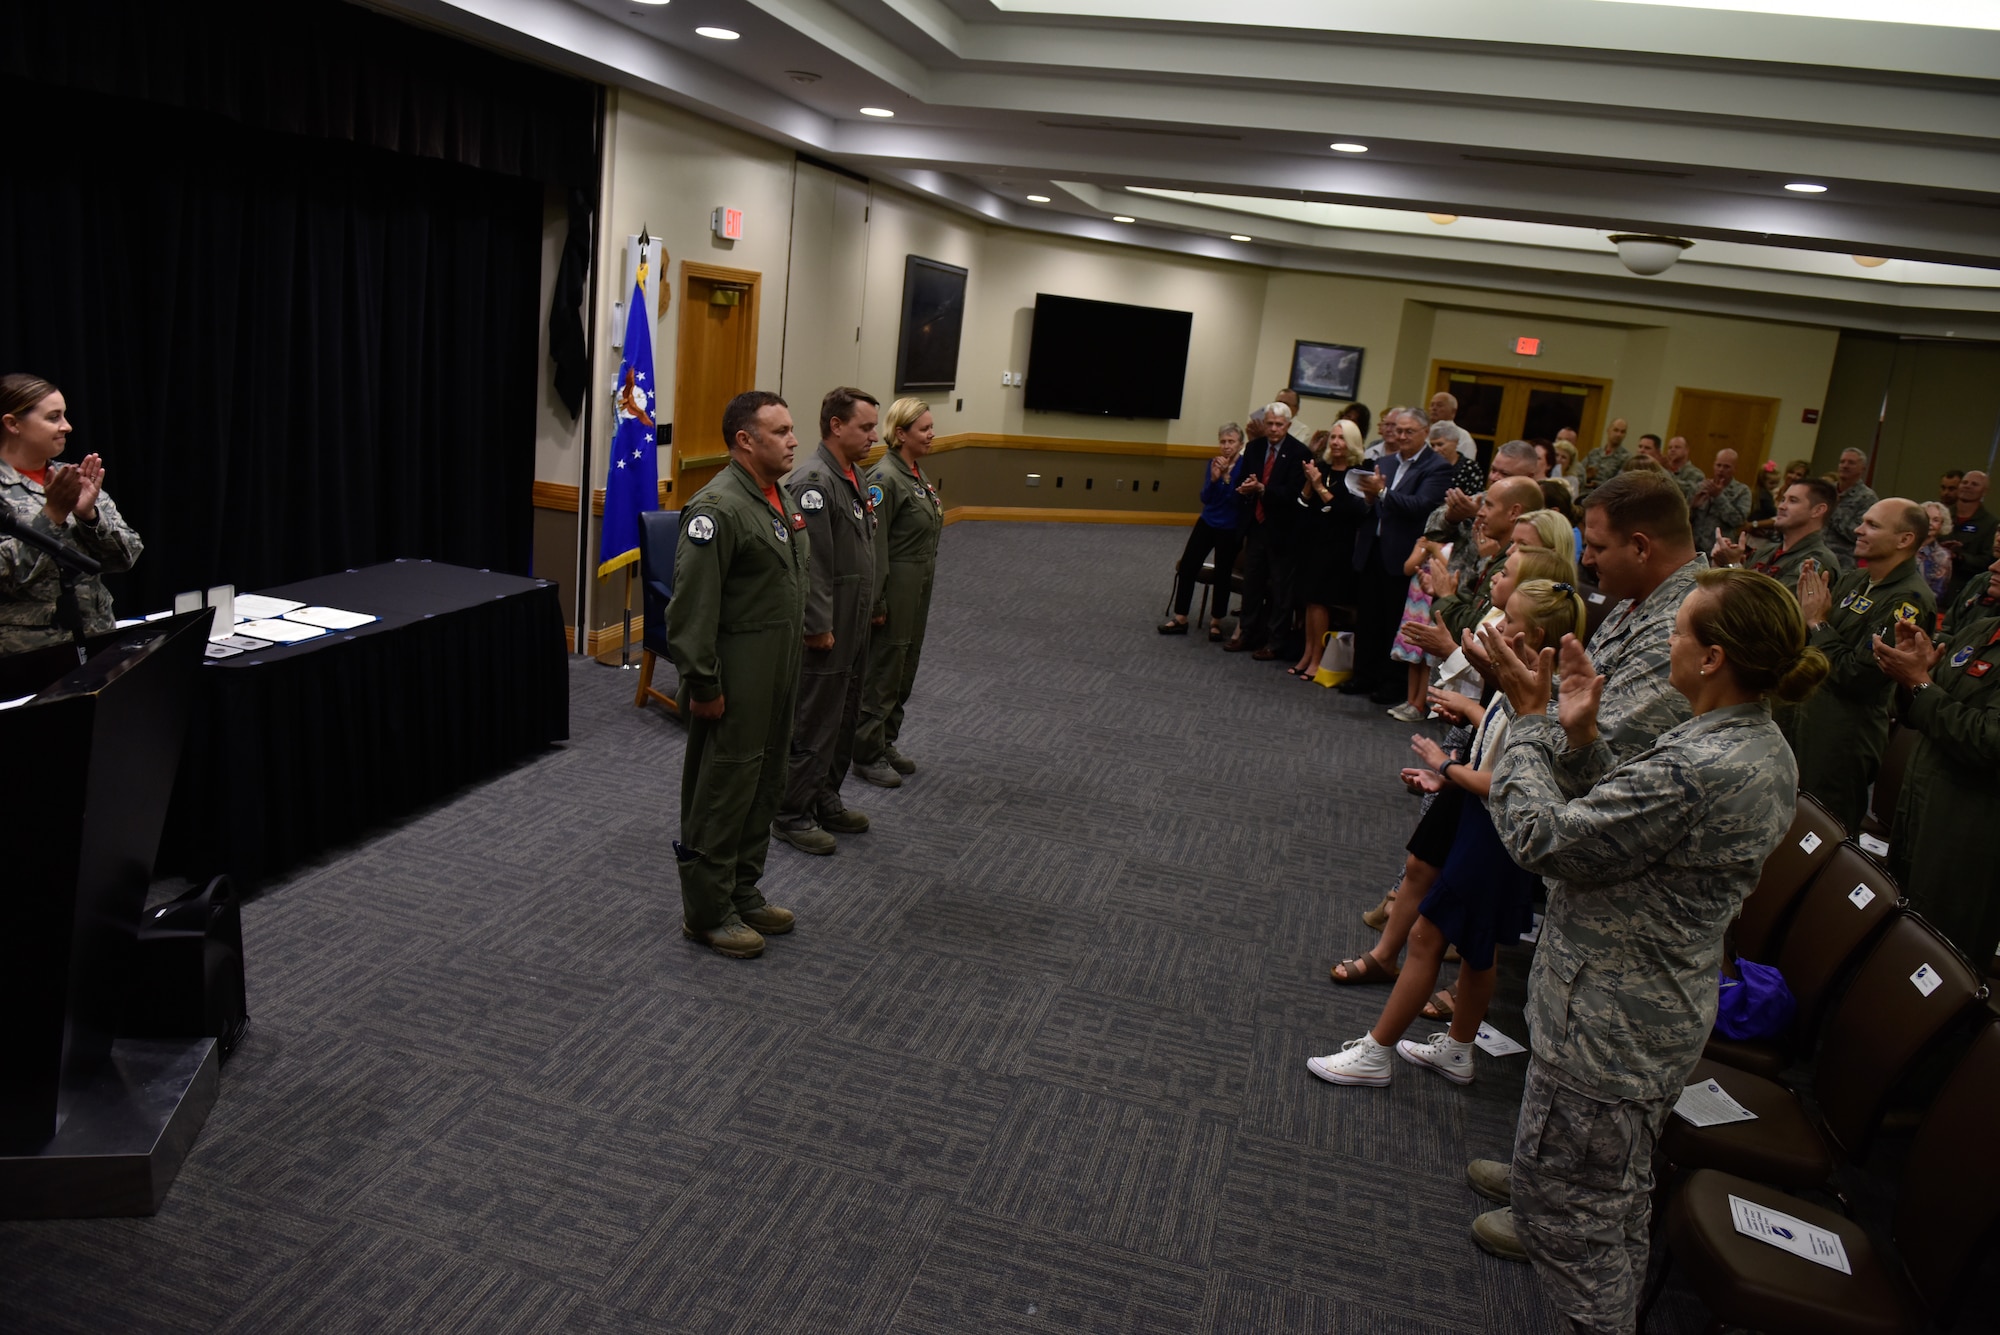 Lt. Cols. John and Jennifer Avery’s Air Force and Air National Guard military careers culminated at their joint retirement ceremony at Whiteman Air Force Base, Missouri.   (U.S. Air Force photo by Tech. Sgt. Alexander W. Riedel)